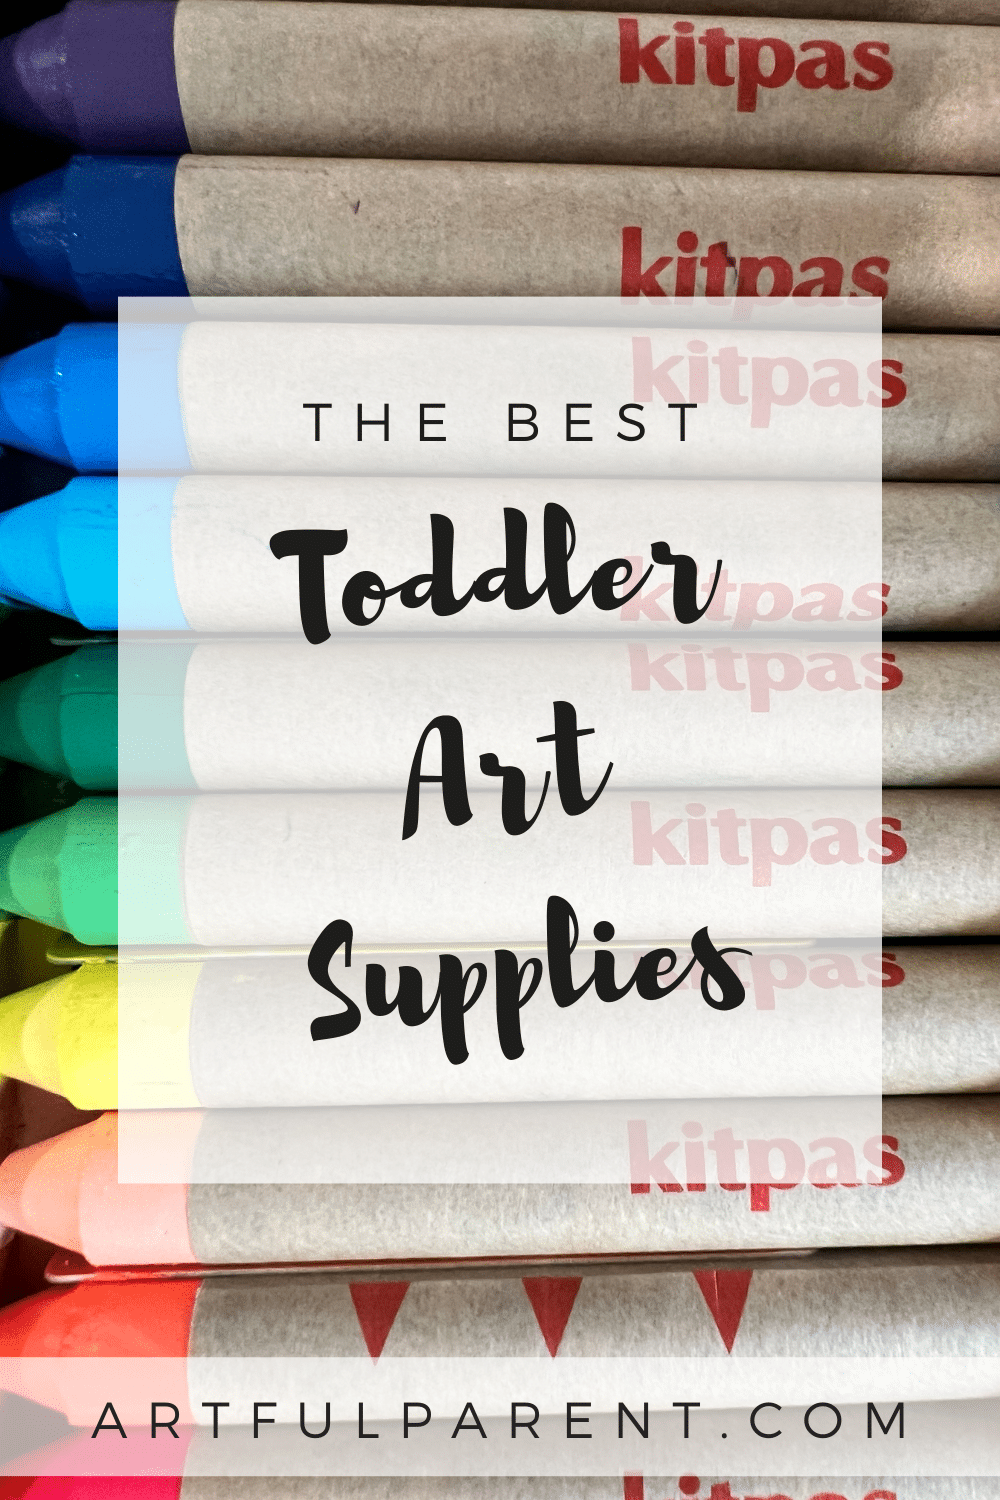 The Best Art Supplies for Toddlers in 2023